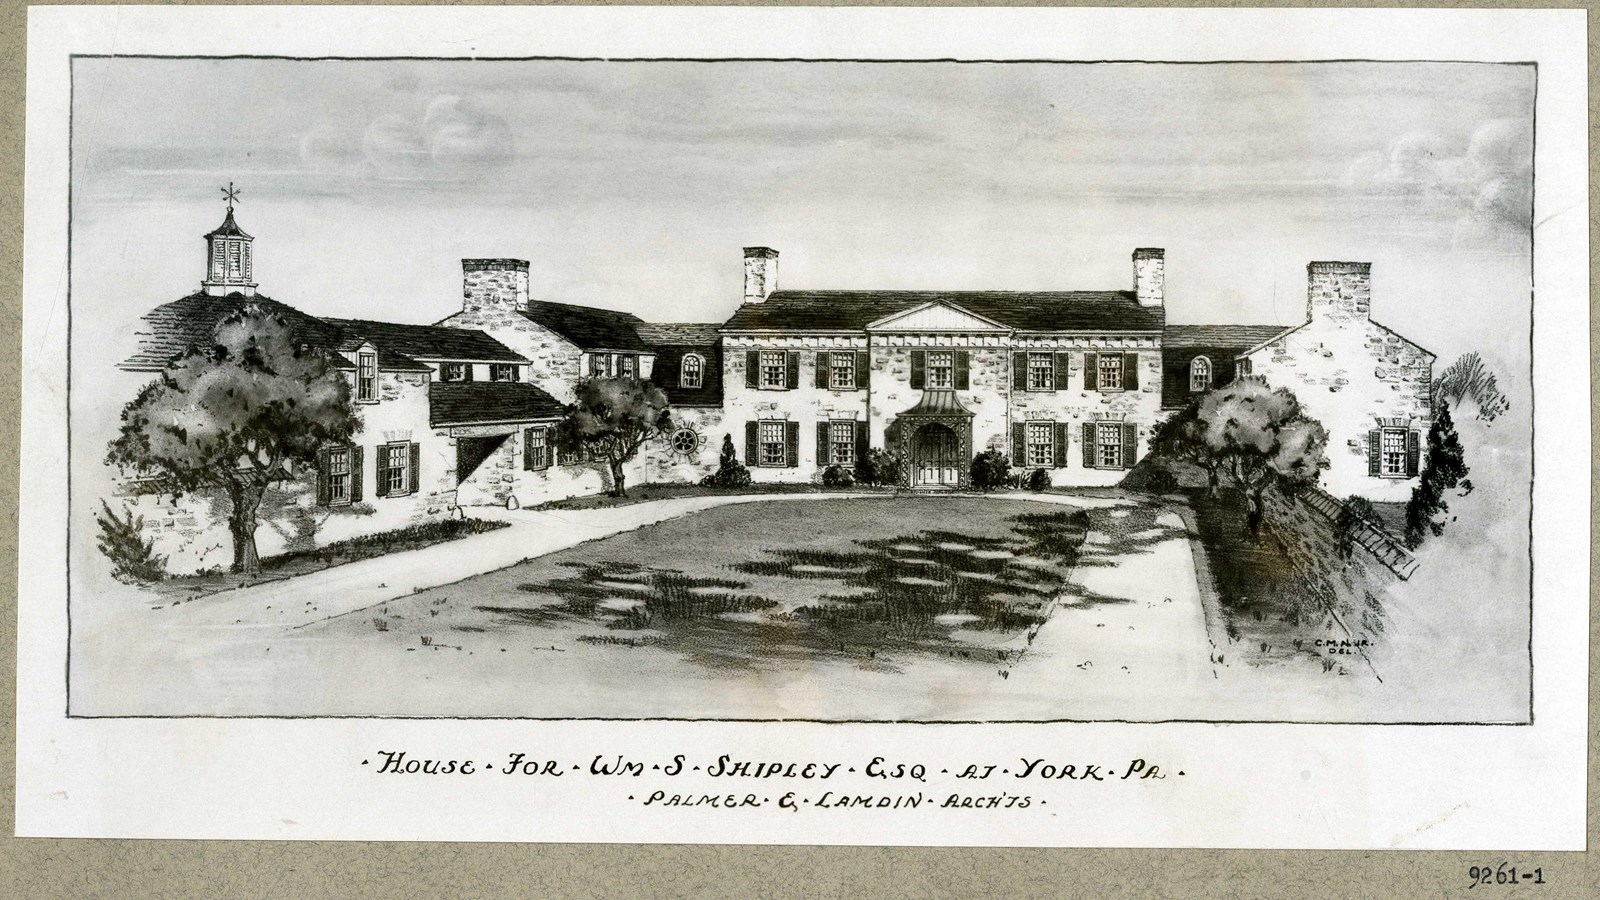 Pencil drawing of large symmetrical estate with grass area in front, trees on edge, and driveway